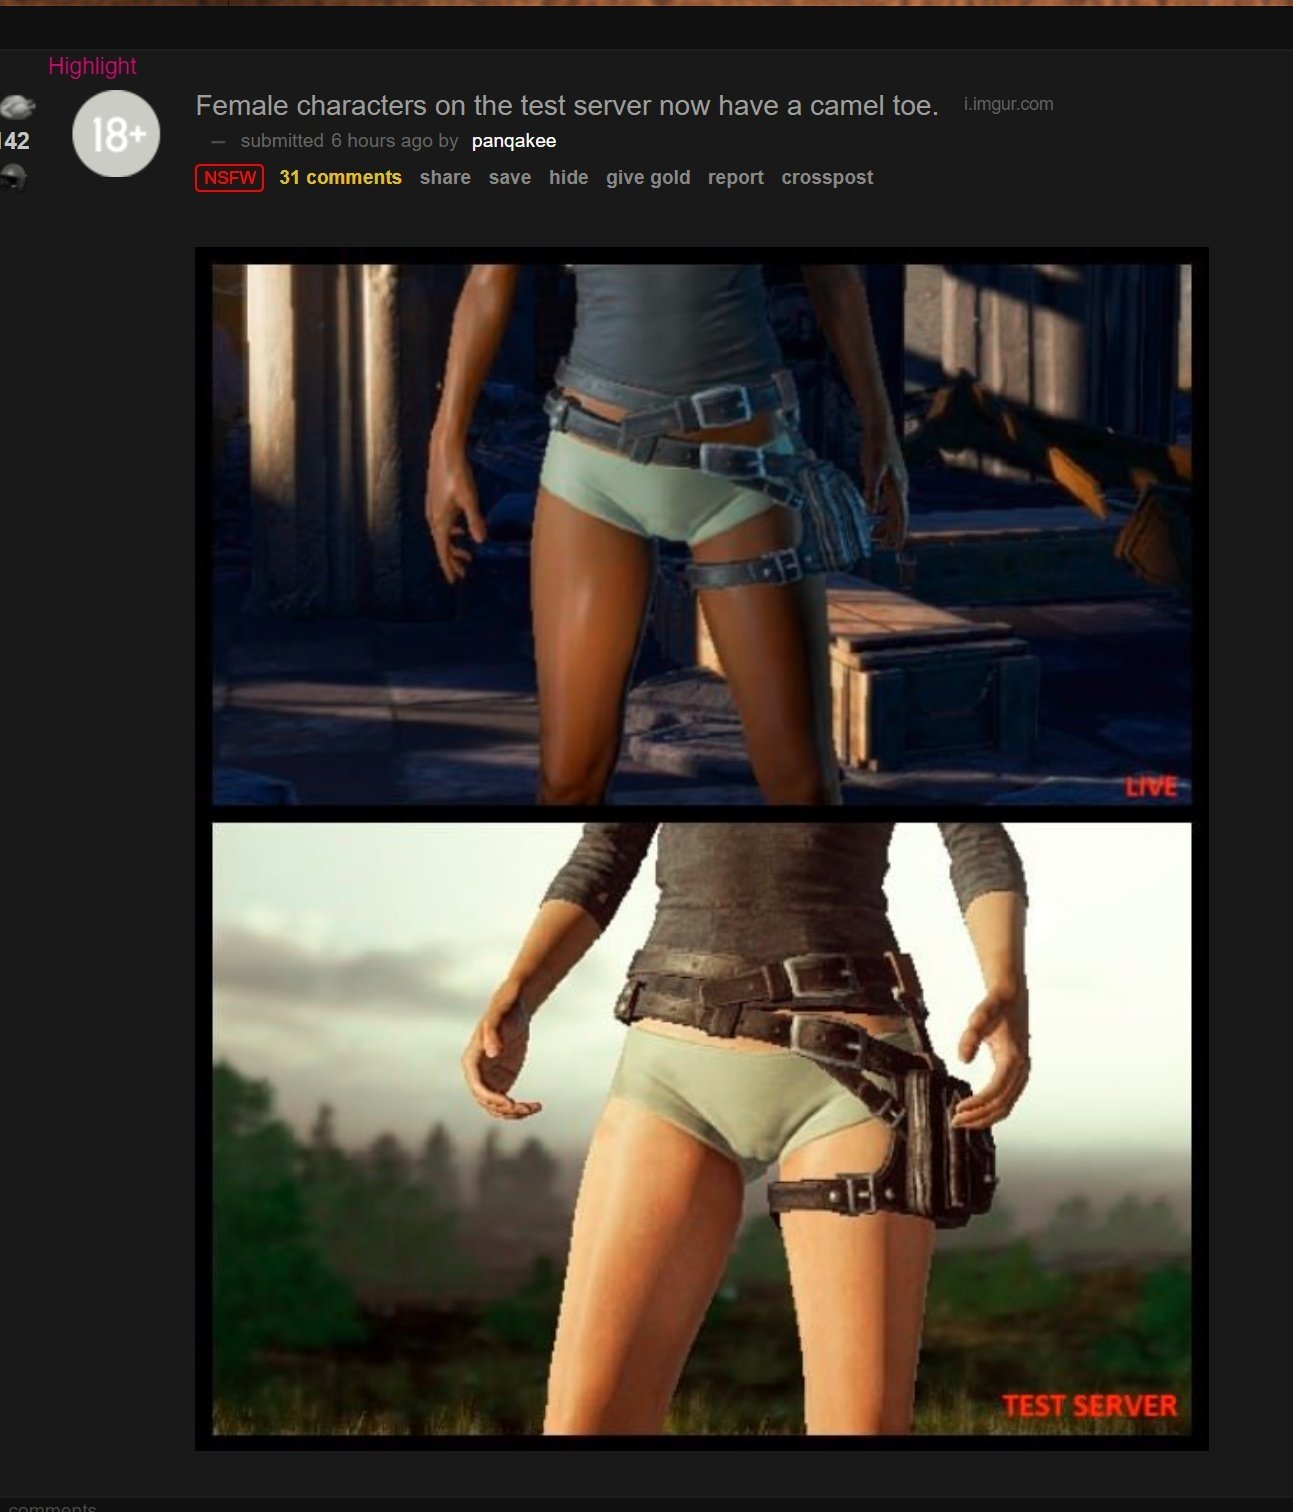 Female characters in PUBG have a camel toe will be edited